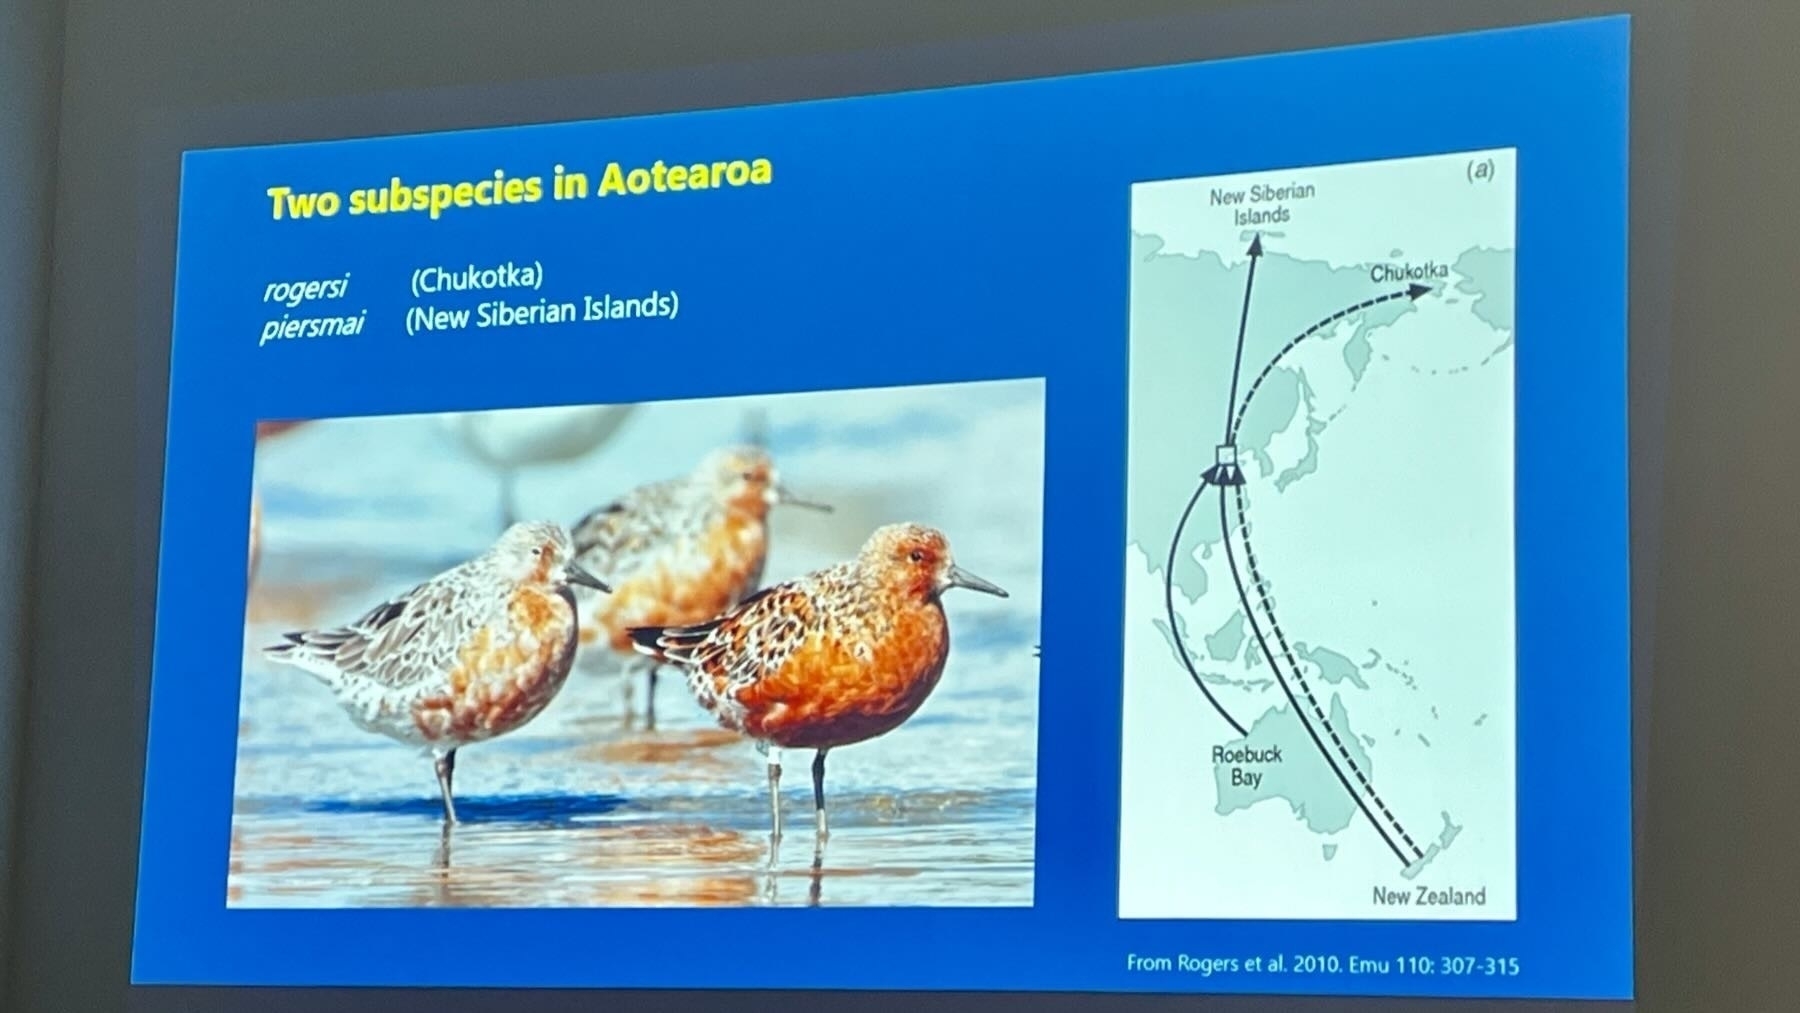 Slide shows there are two subspecies and their flight paths to the Arctic.